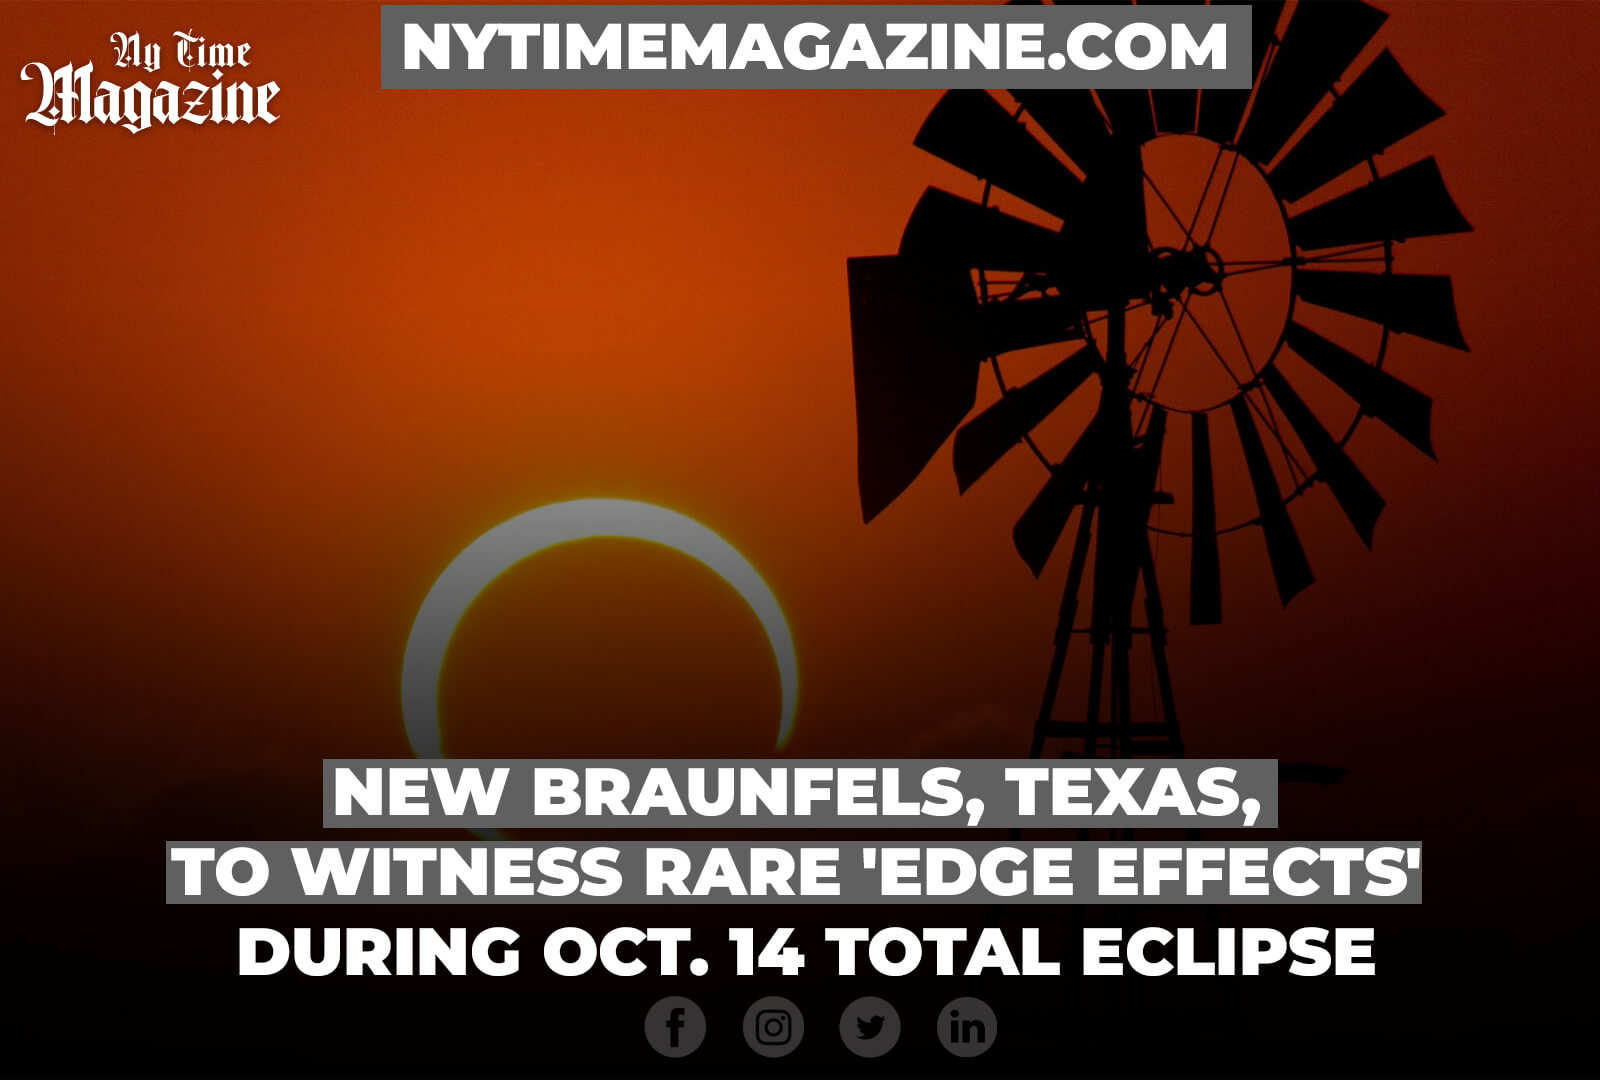 New Braunfels, Texas, to Witness Rare 'Edge Effects' During Oct. 14 Total Eclipse